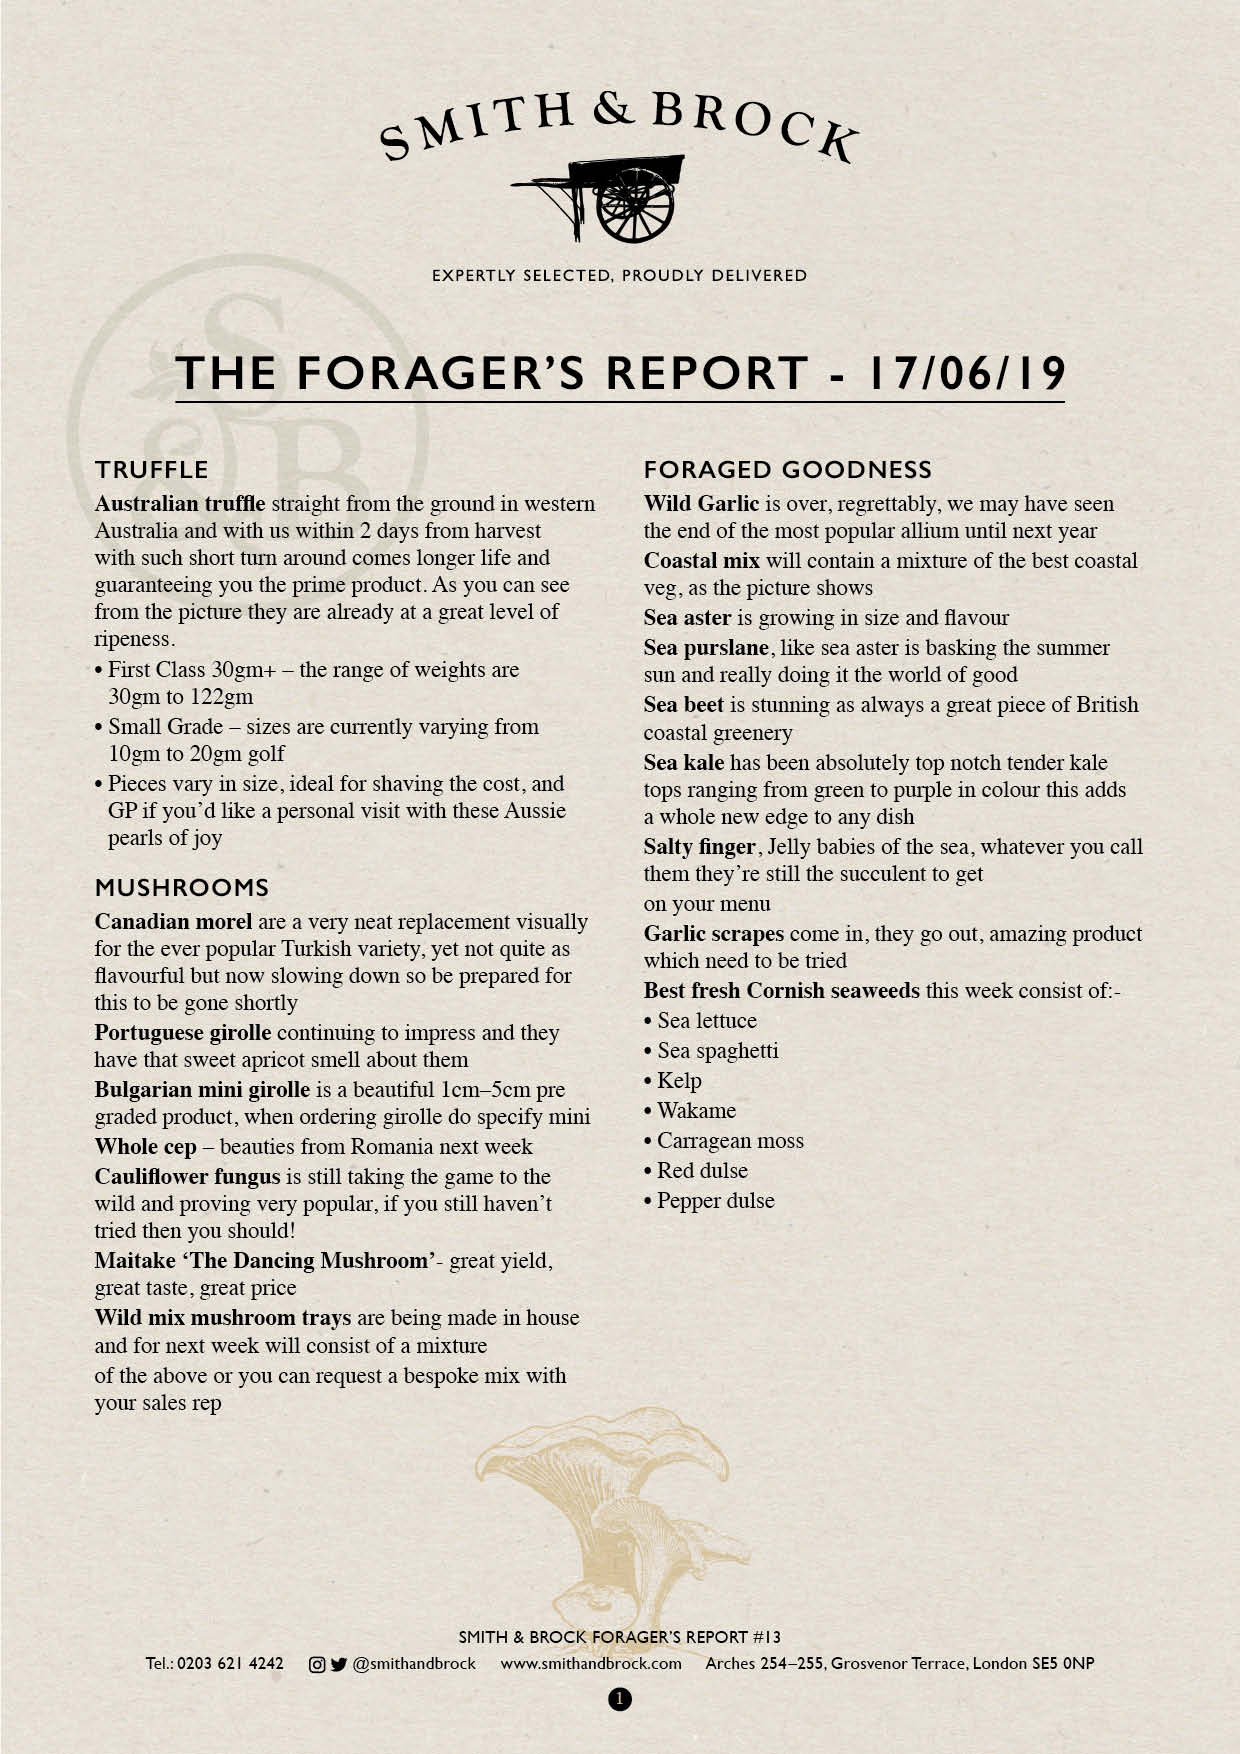 Smith&Brock Foraged Products Report 17 June 2019 13